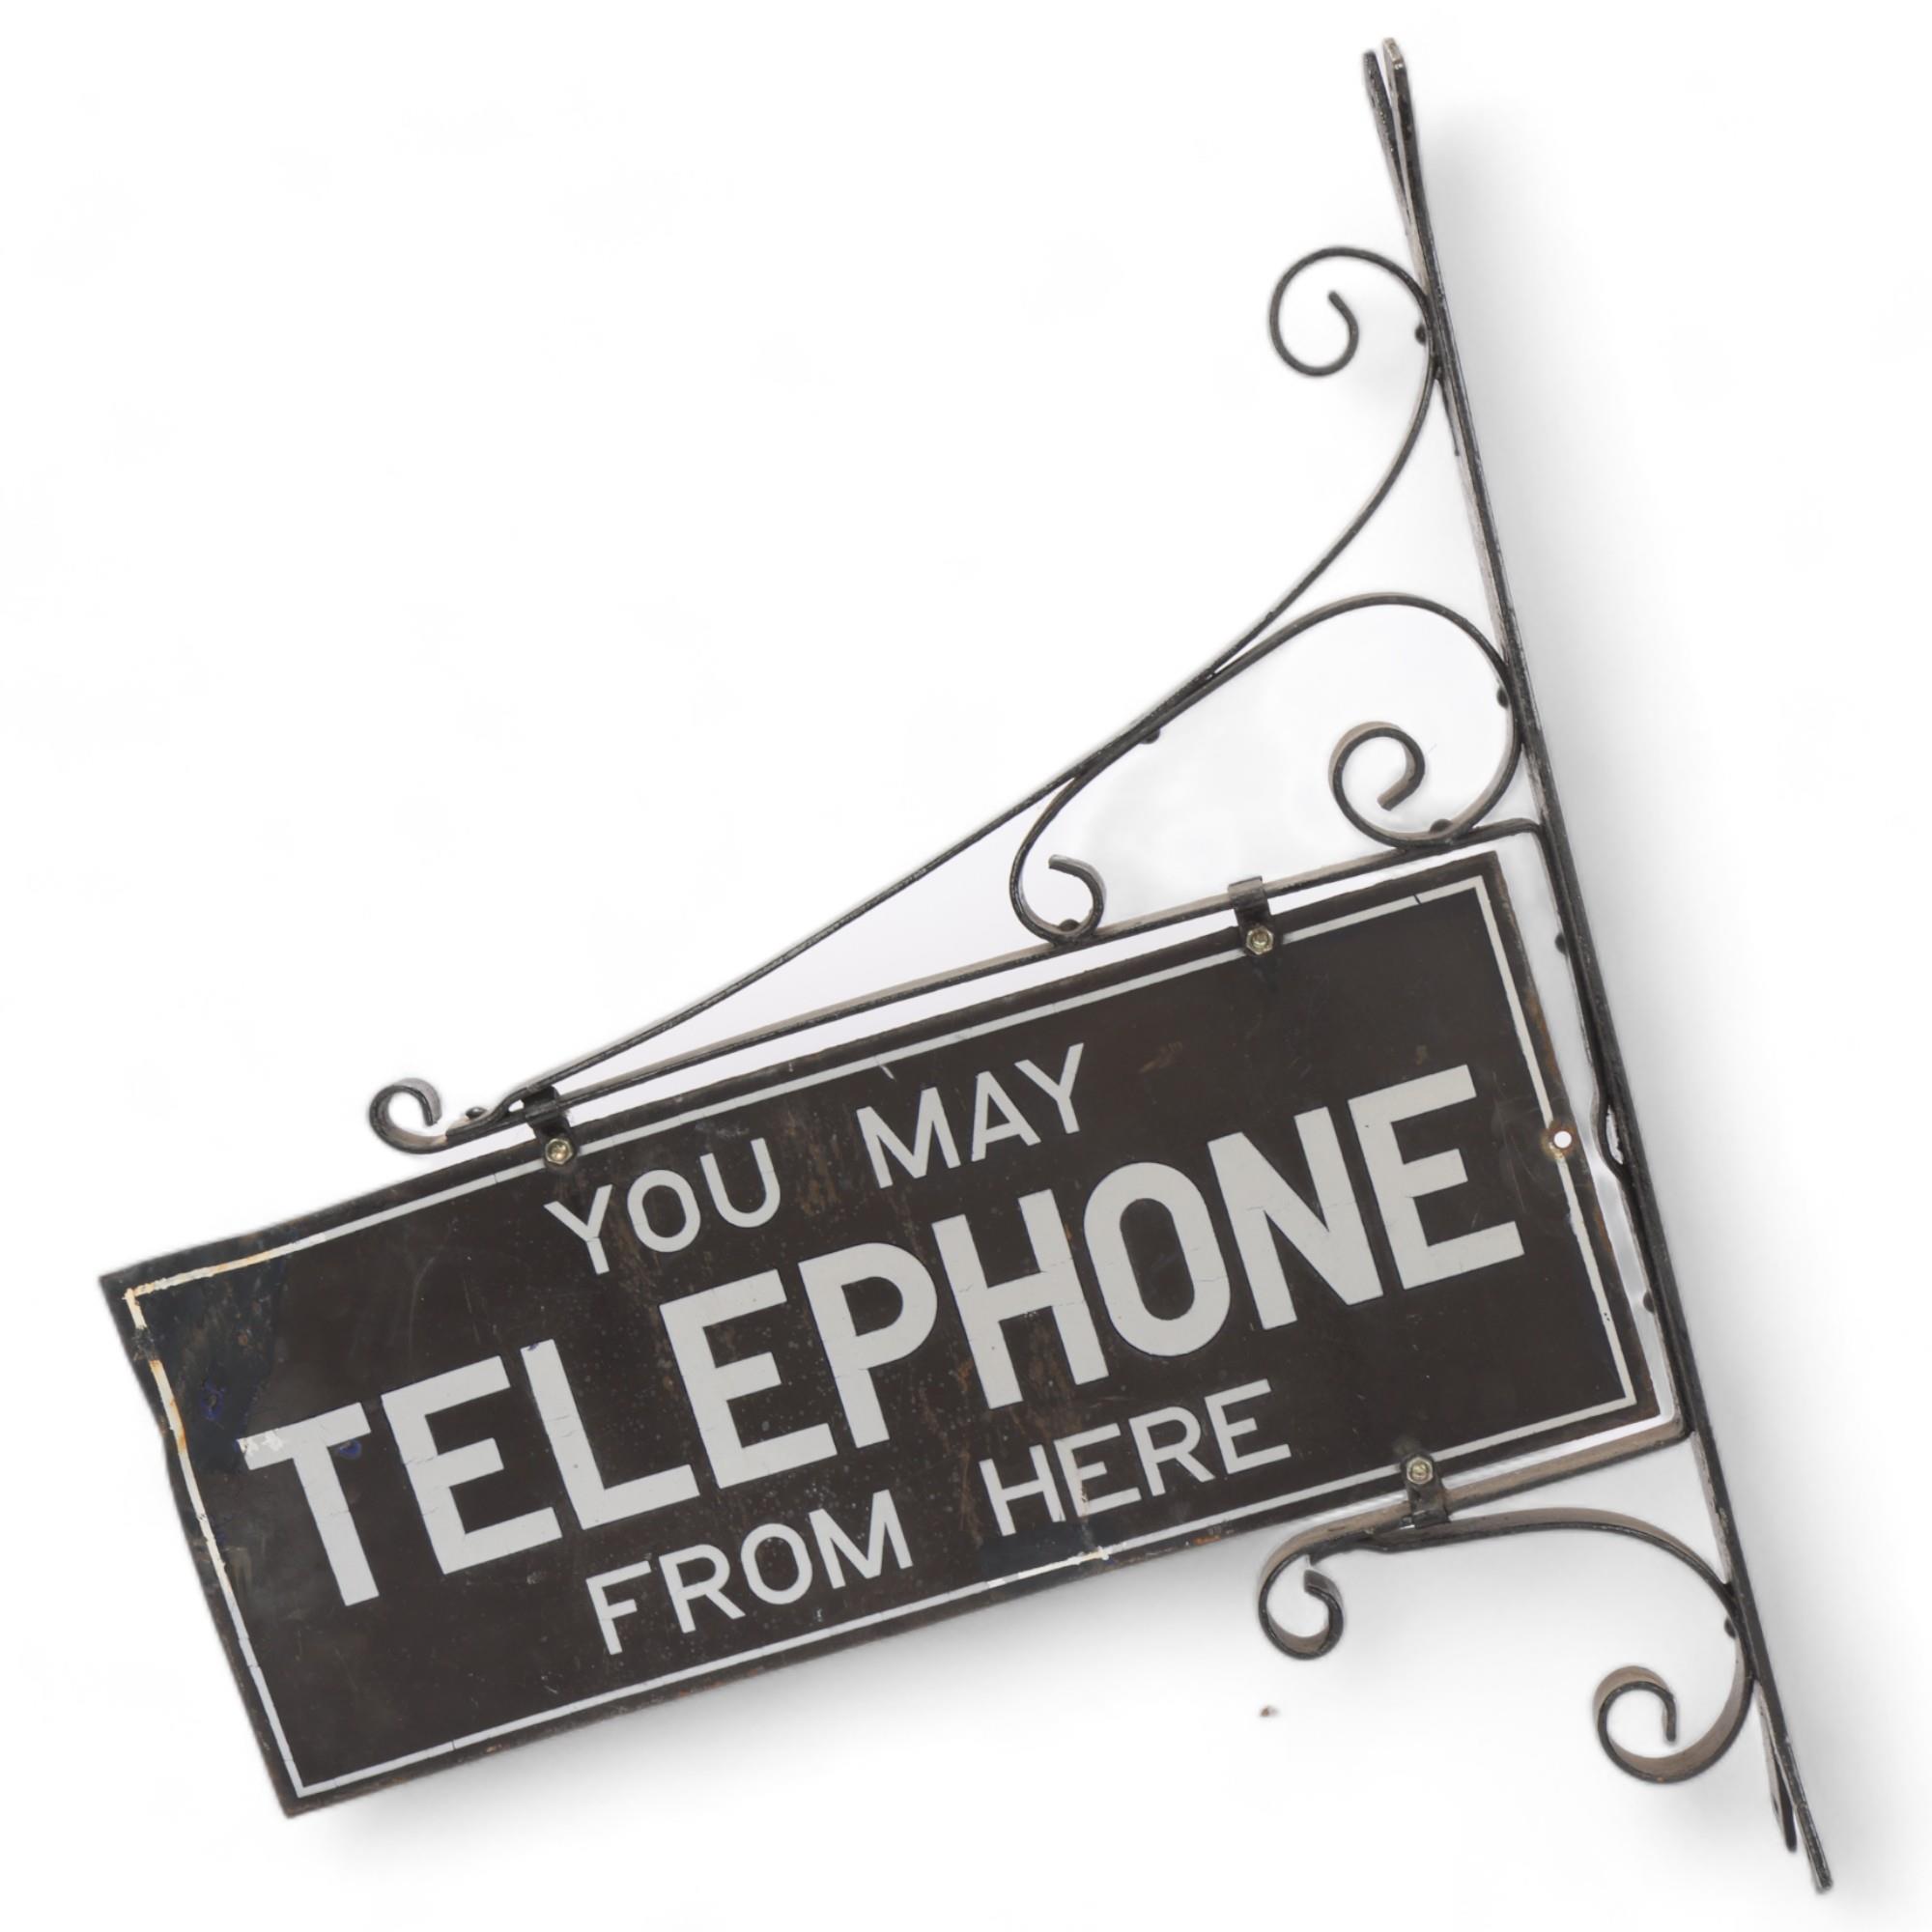 A Vintage enamel sign "You May Telephone From Here", double-sided in wrought-iron wall mounted